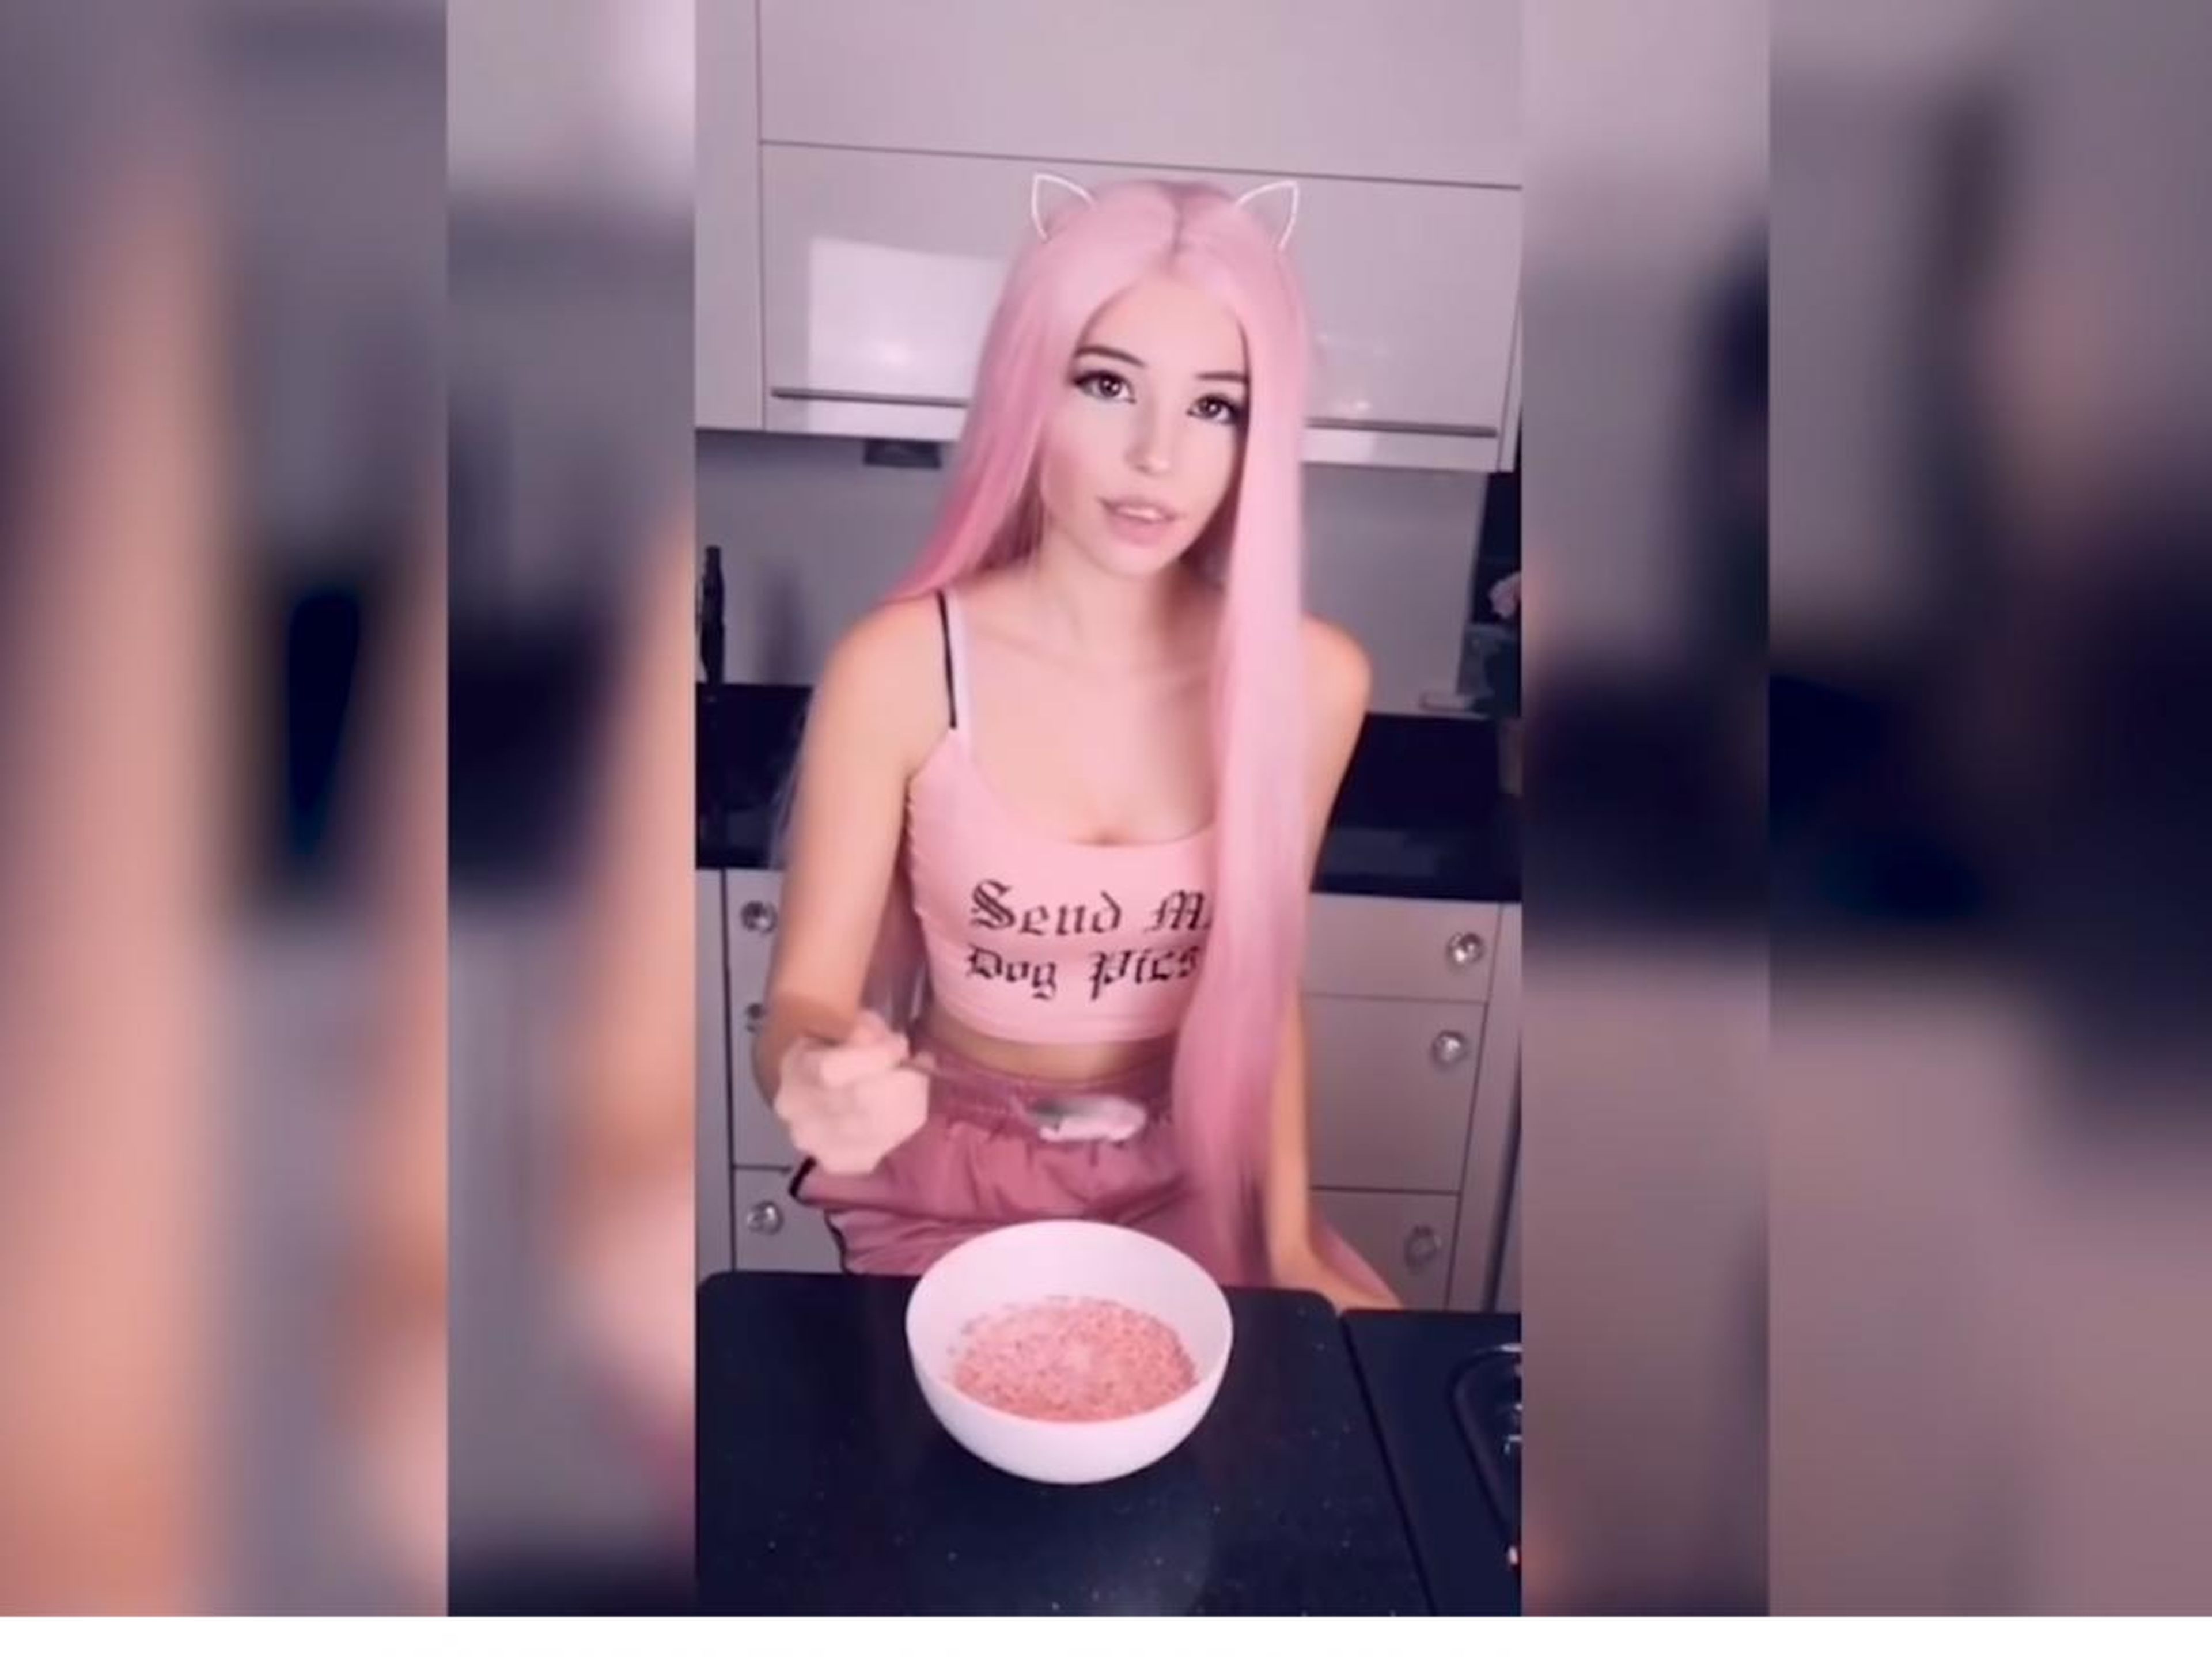 Instagram star Belle Delphine, someone who may have been referred to as an e-girl before 2019.